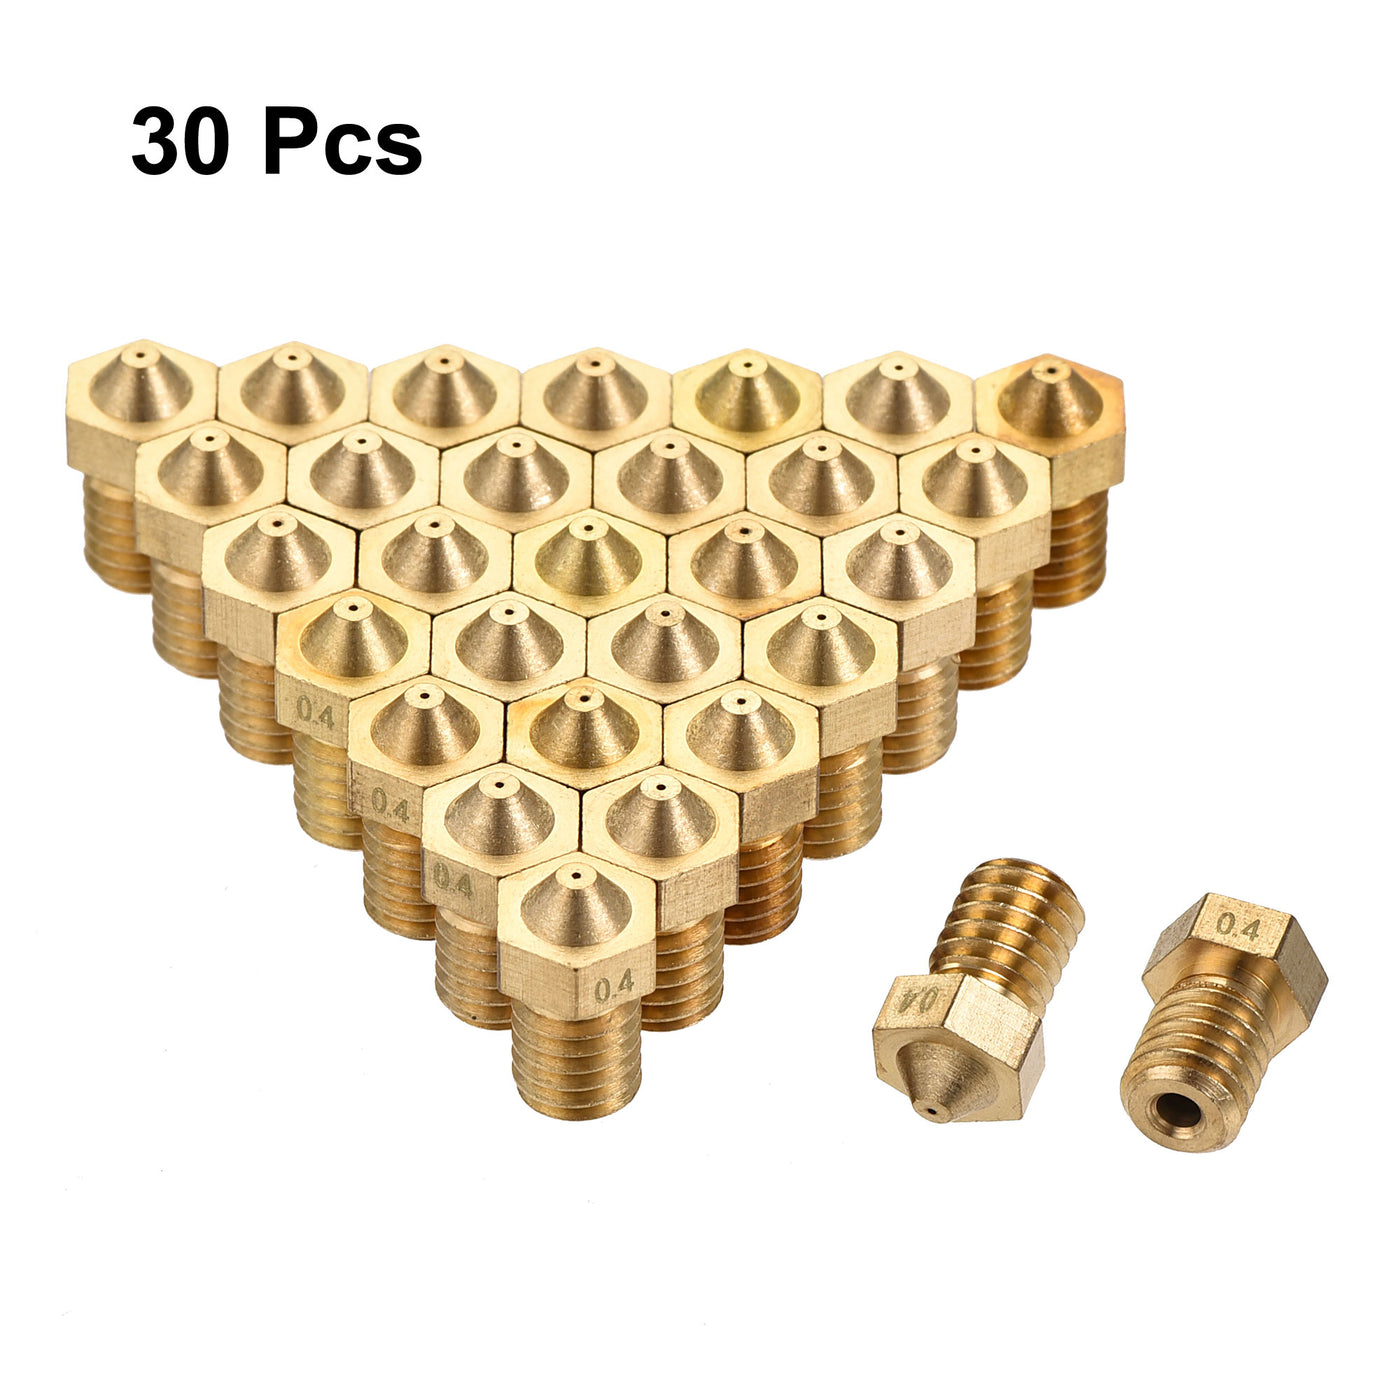 uxcell Uxcell 0.4mm 3D Printer Nozzle, 30pcs M6 Thread for V5 V6 1.75mm Extruder Print, Brass